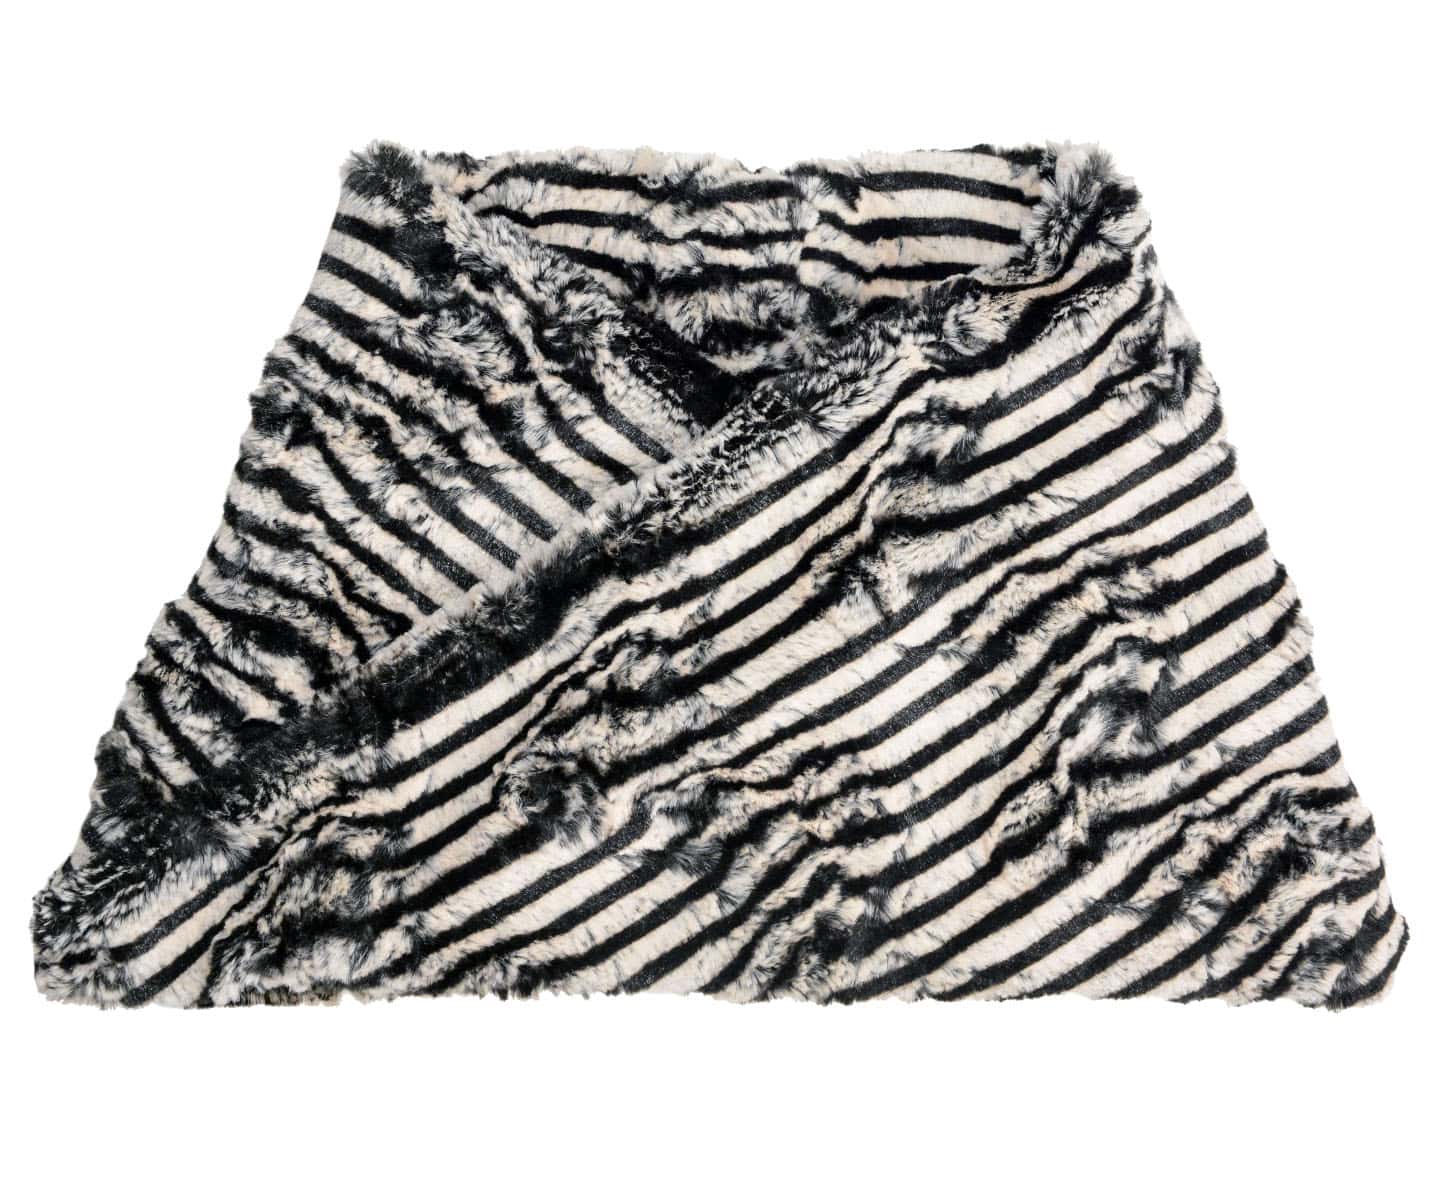 Neck Warmer | Tipsy Zebra, Black and White Stripes  Faux Fur | Handmade in the USA by Pandemonium Seattle